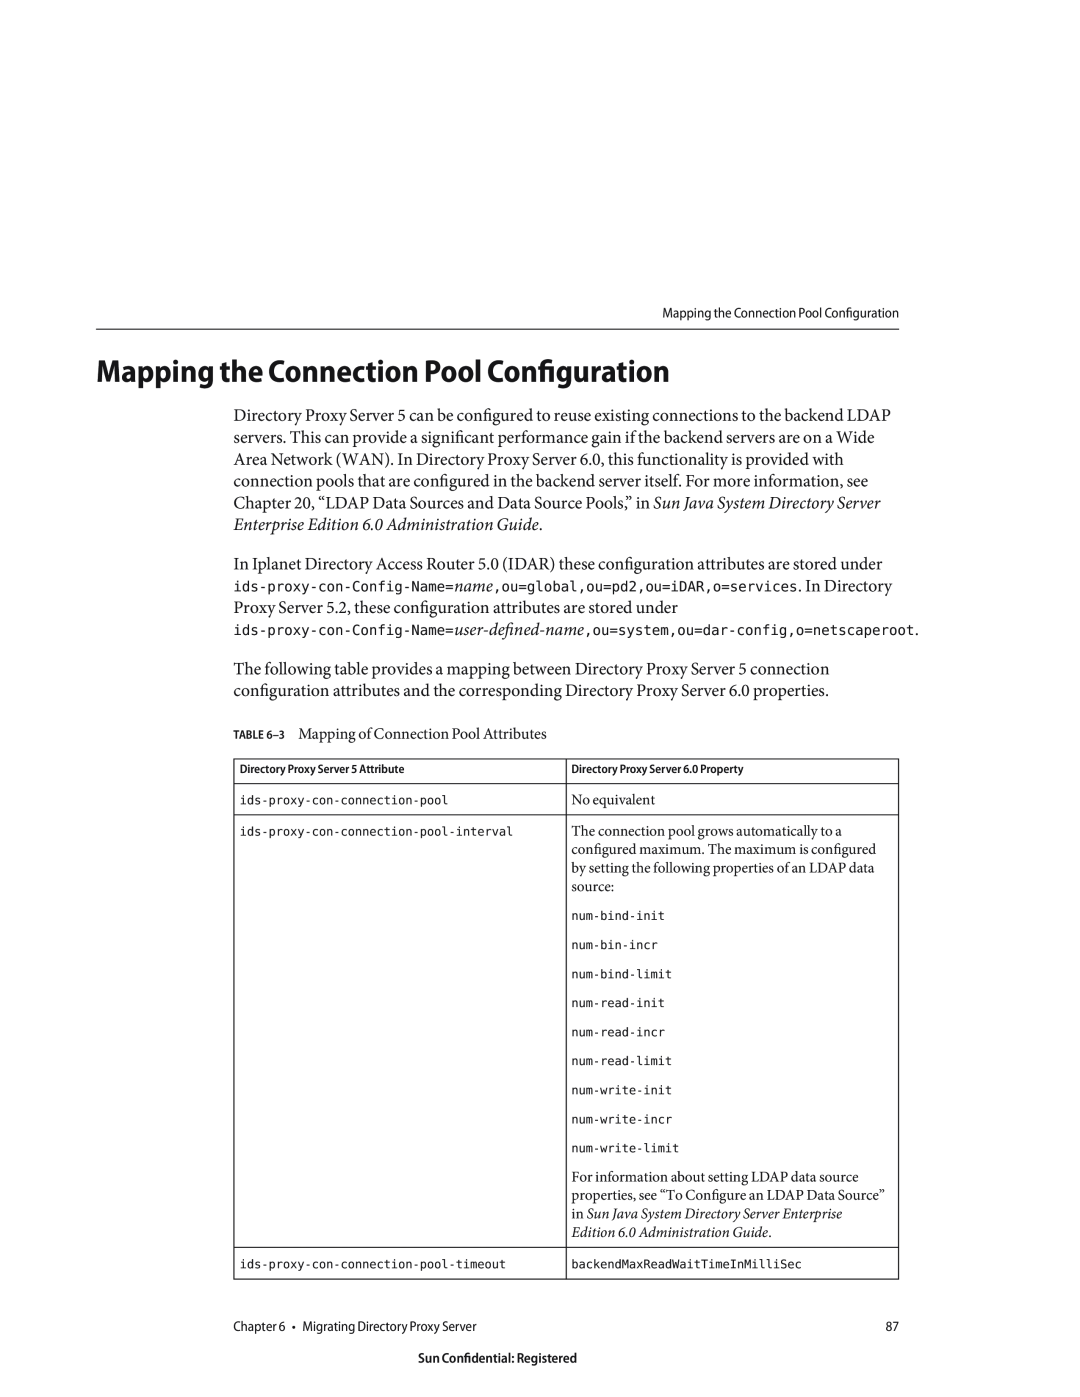 Sun Microsystems 8190994 manual Mapping the Connection Pool Configuration, 3 Mapping of Connection Pool Attributes 